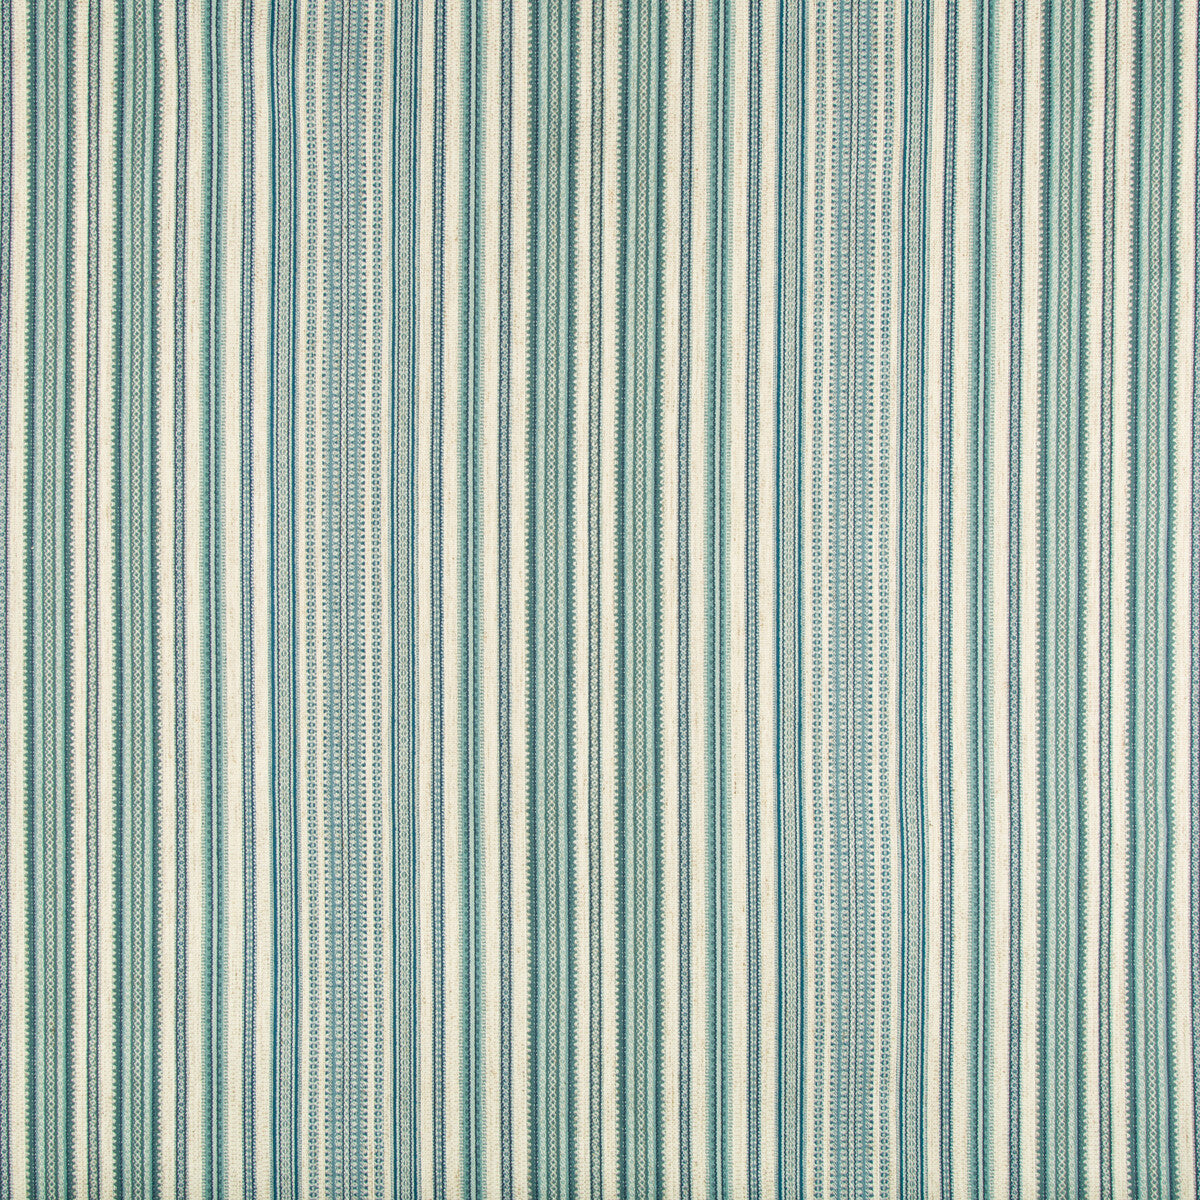 Kravet Design fabric in 34991-1615 color - pattern 34991.1615.0 - by Kravet Design in the Performance Crypton Home collection